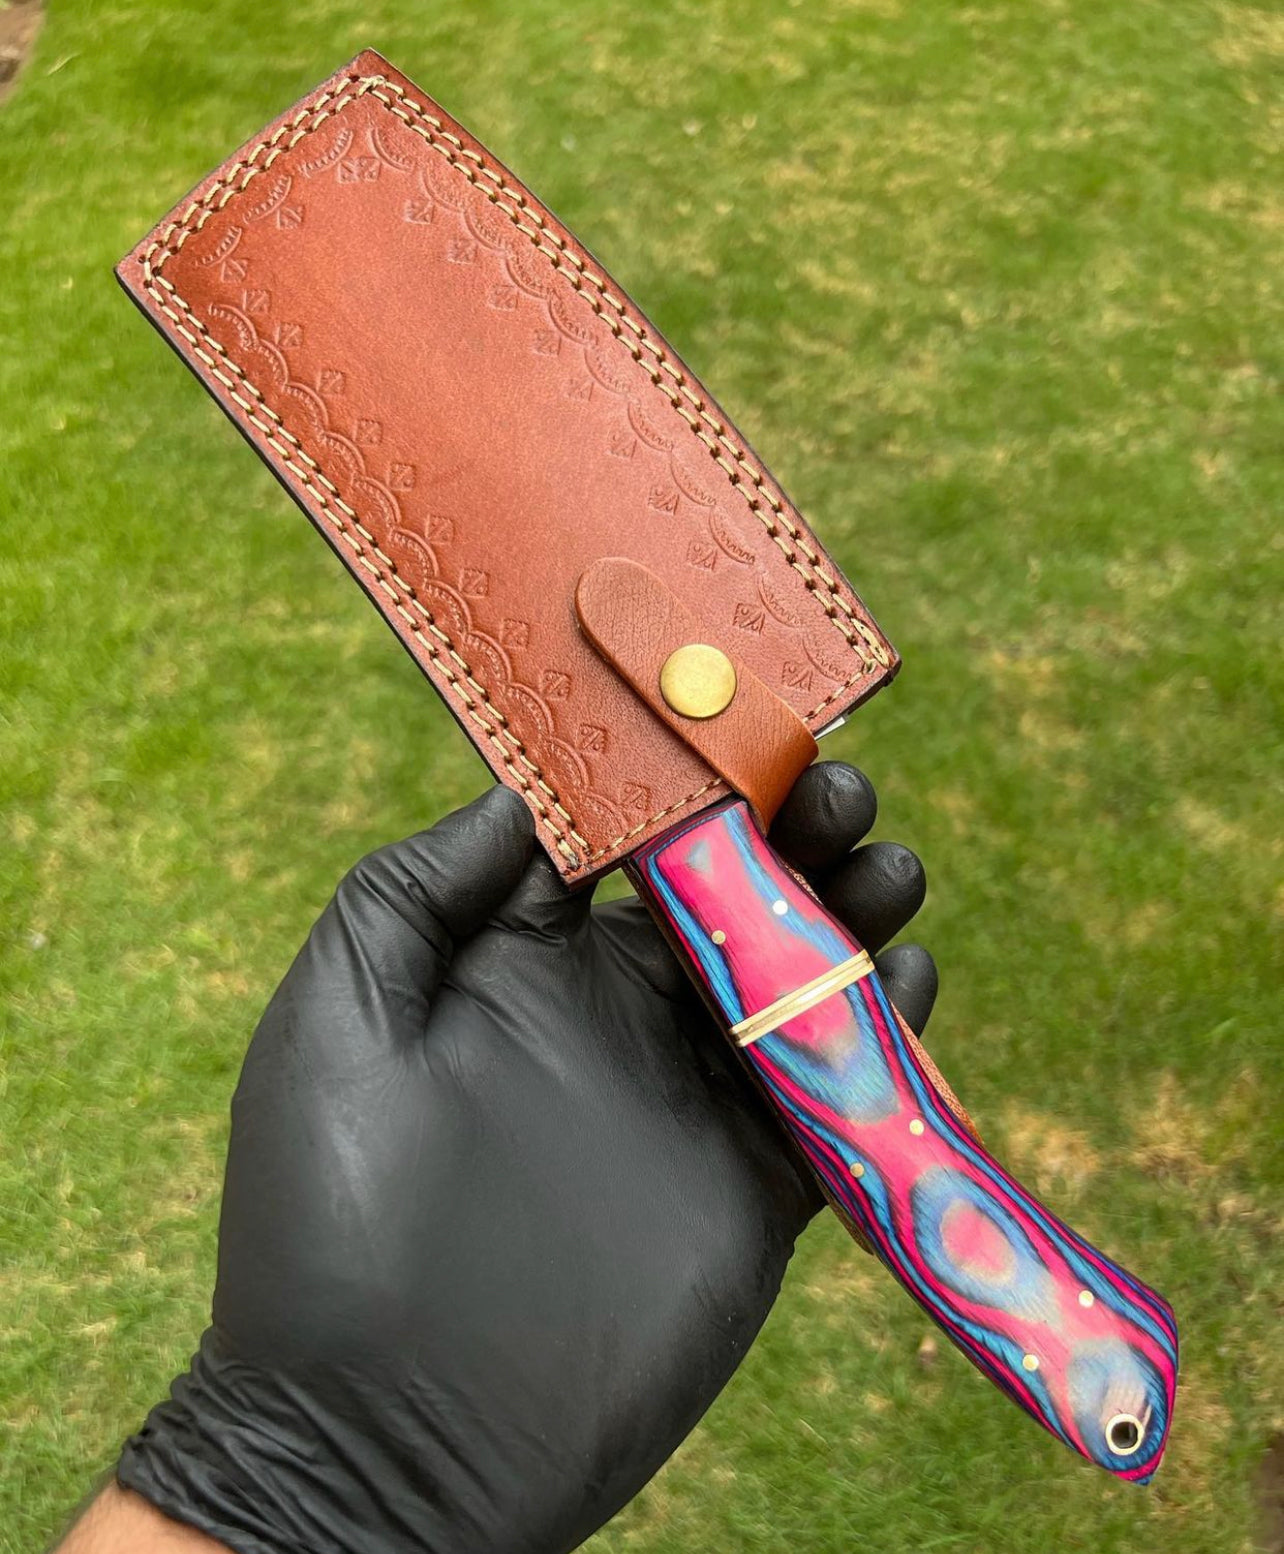 Custom Hand Forged High Carbon steel Cleaver Knife